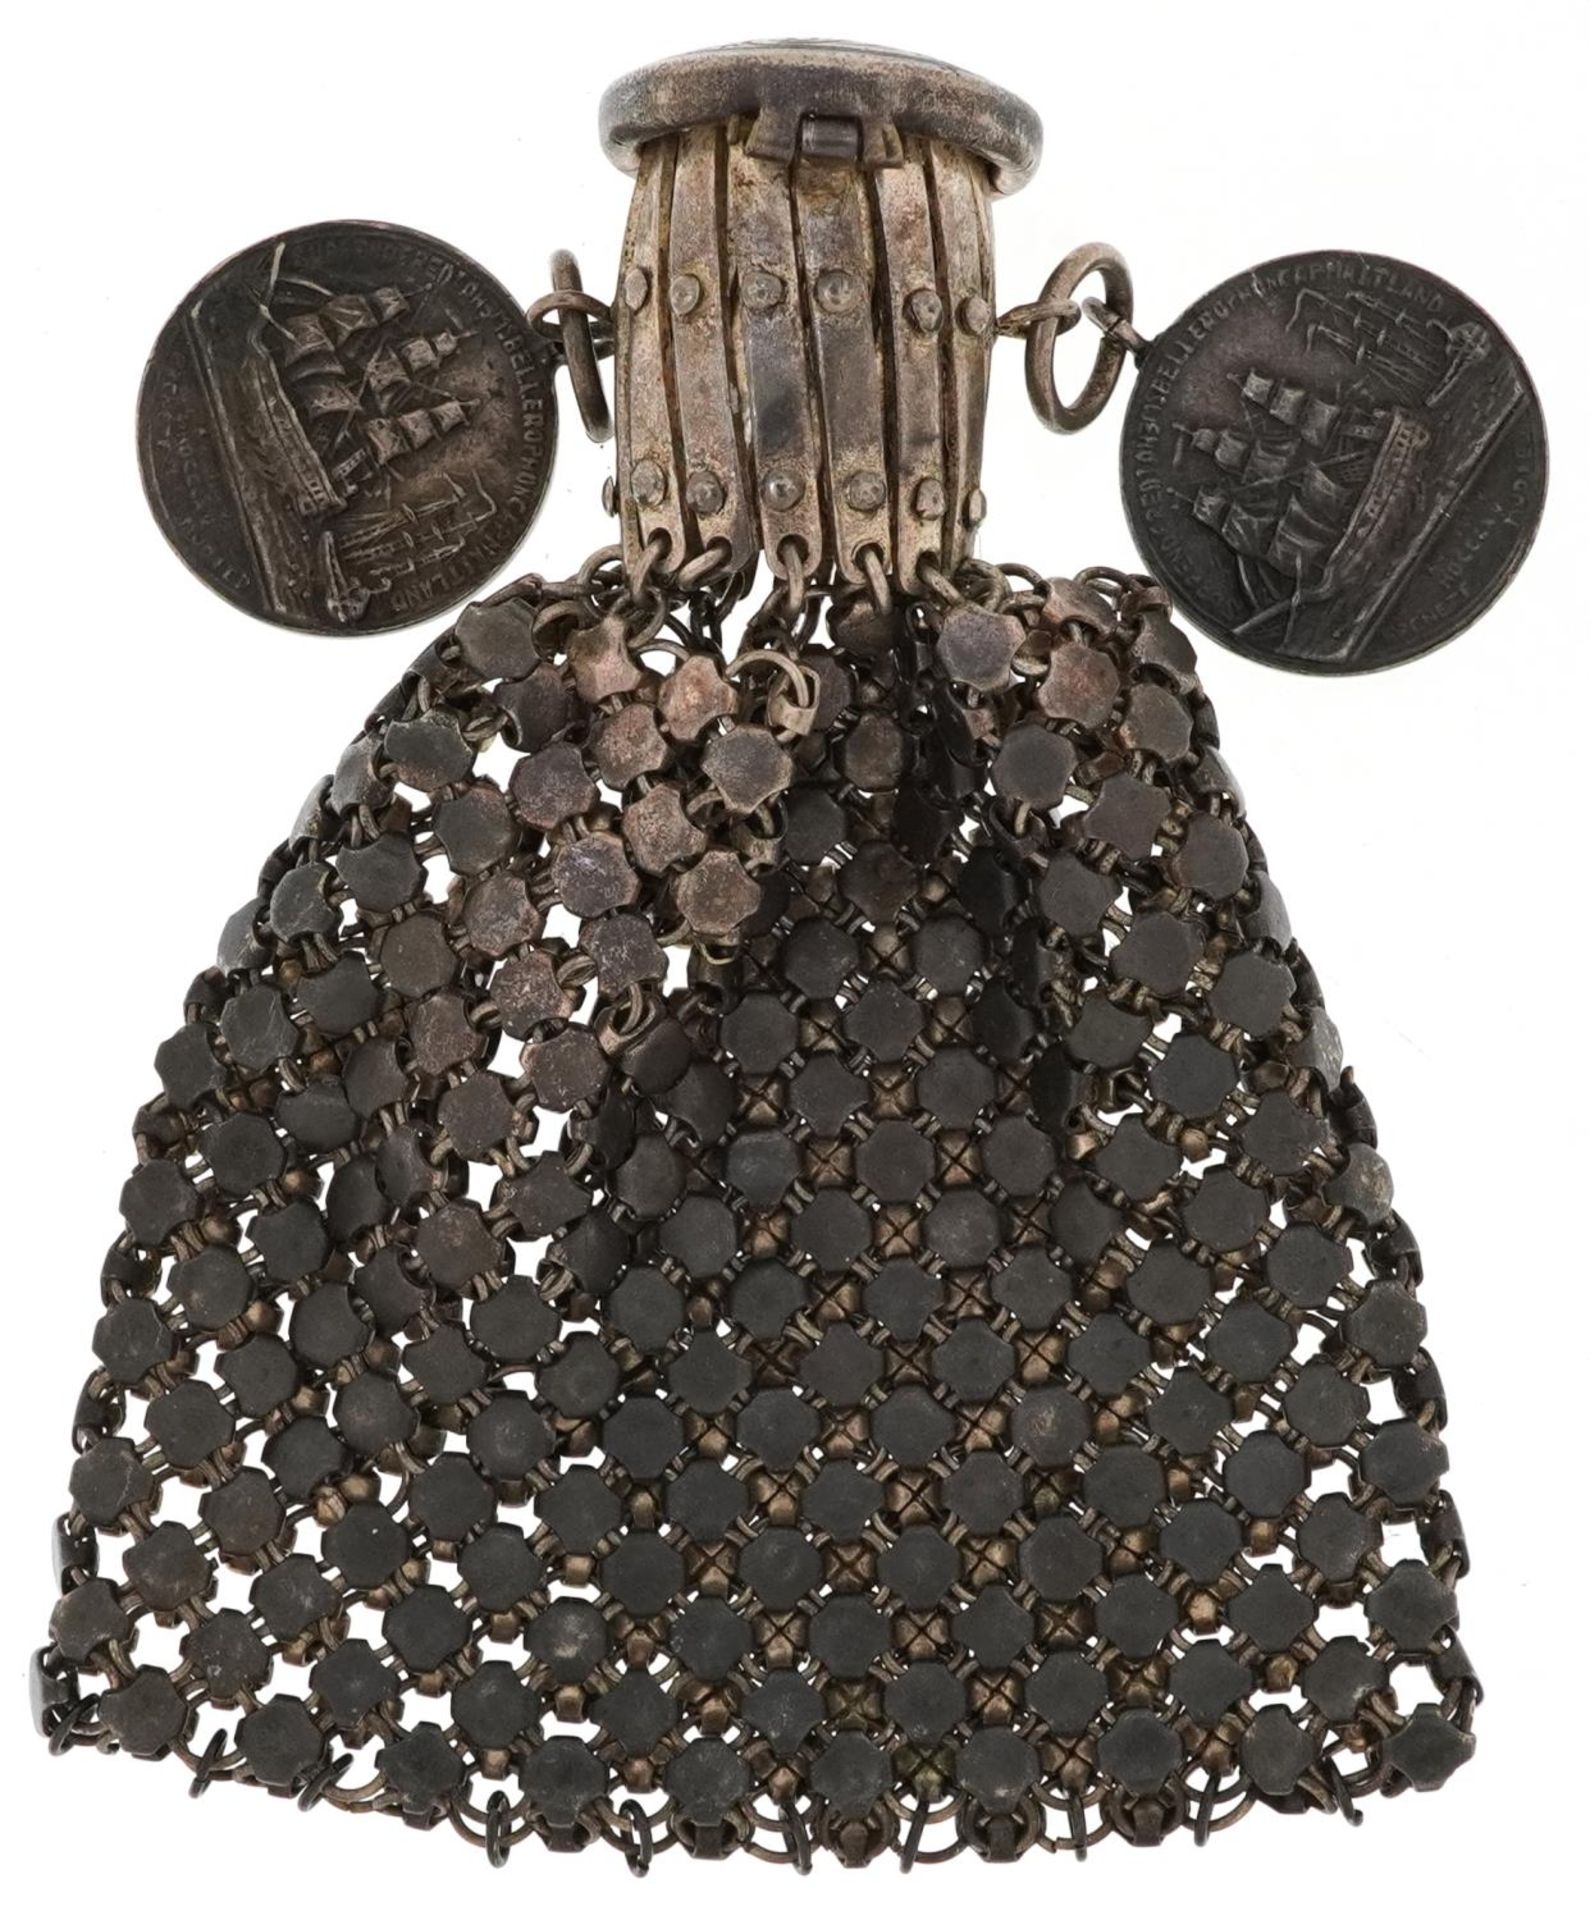 Antique steel miser's purse with two Napoleon medallions, 9cm high x 7cm wide - Image 3 of 4